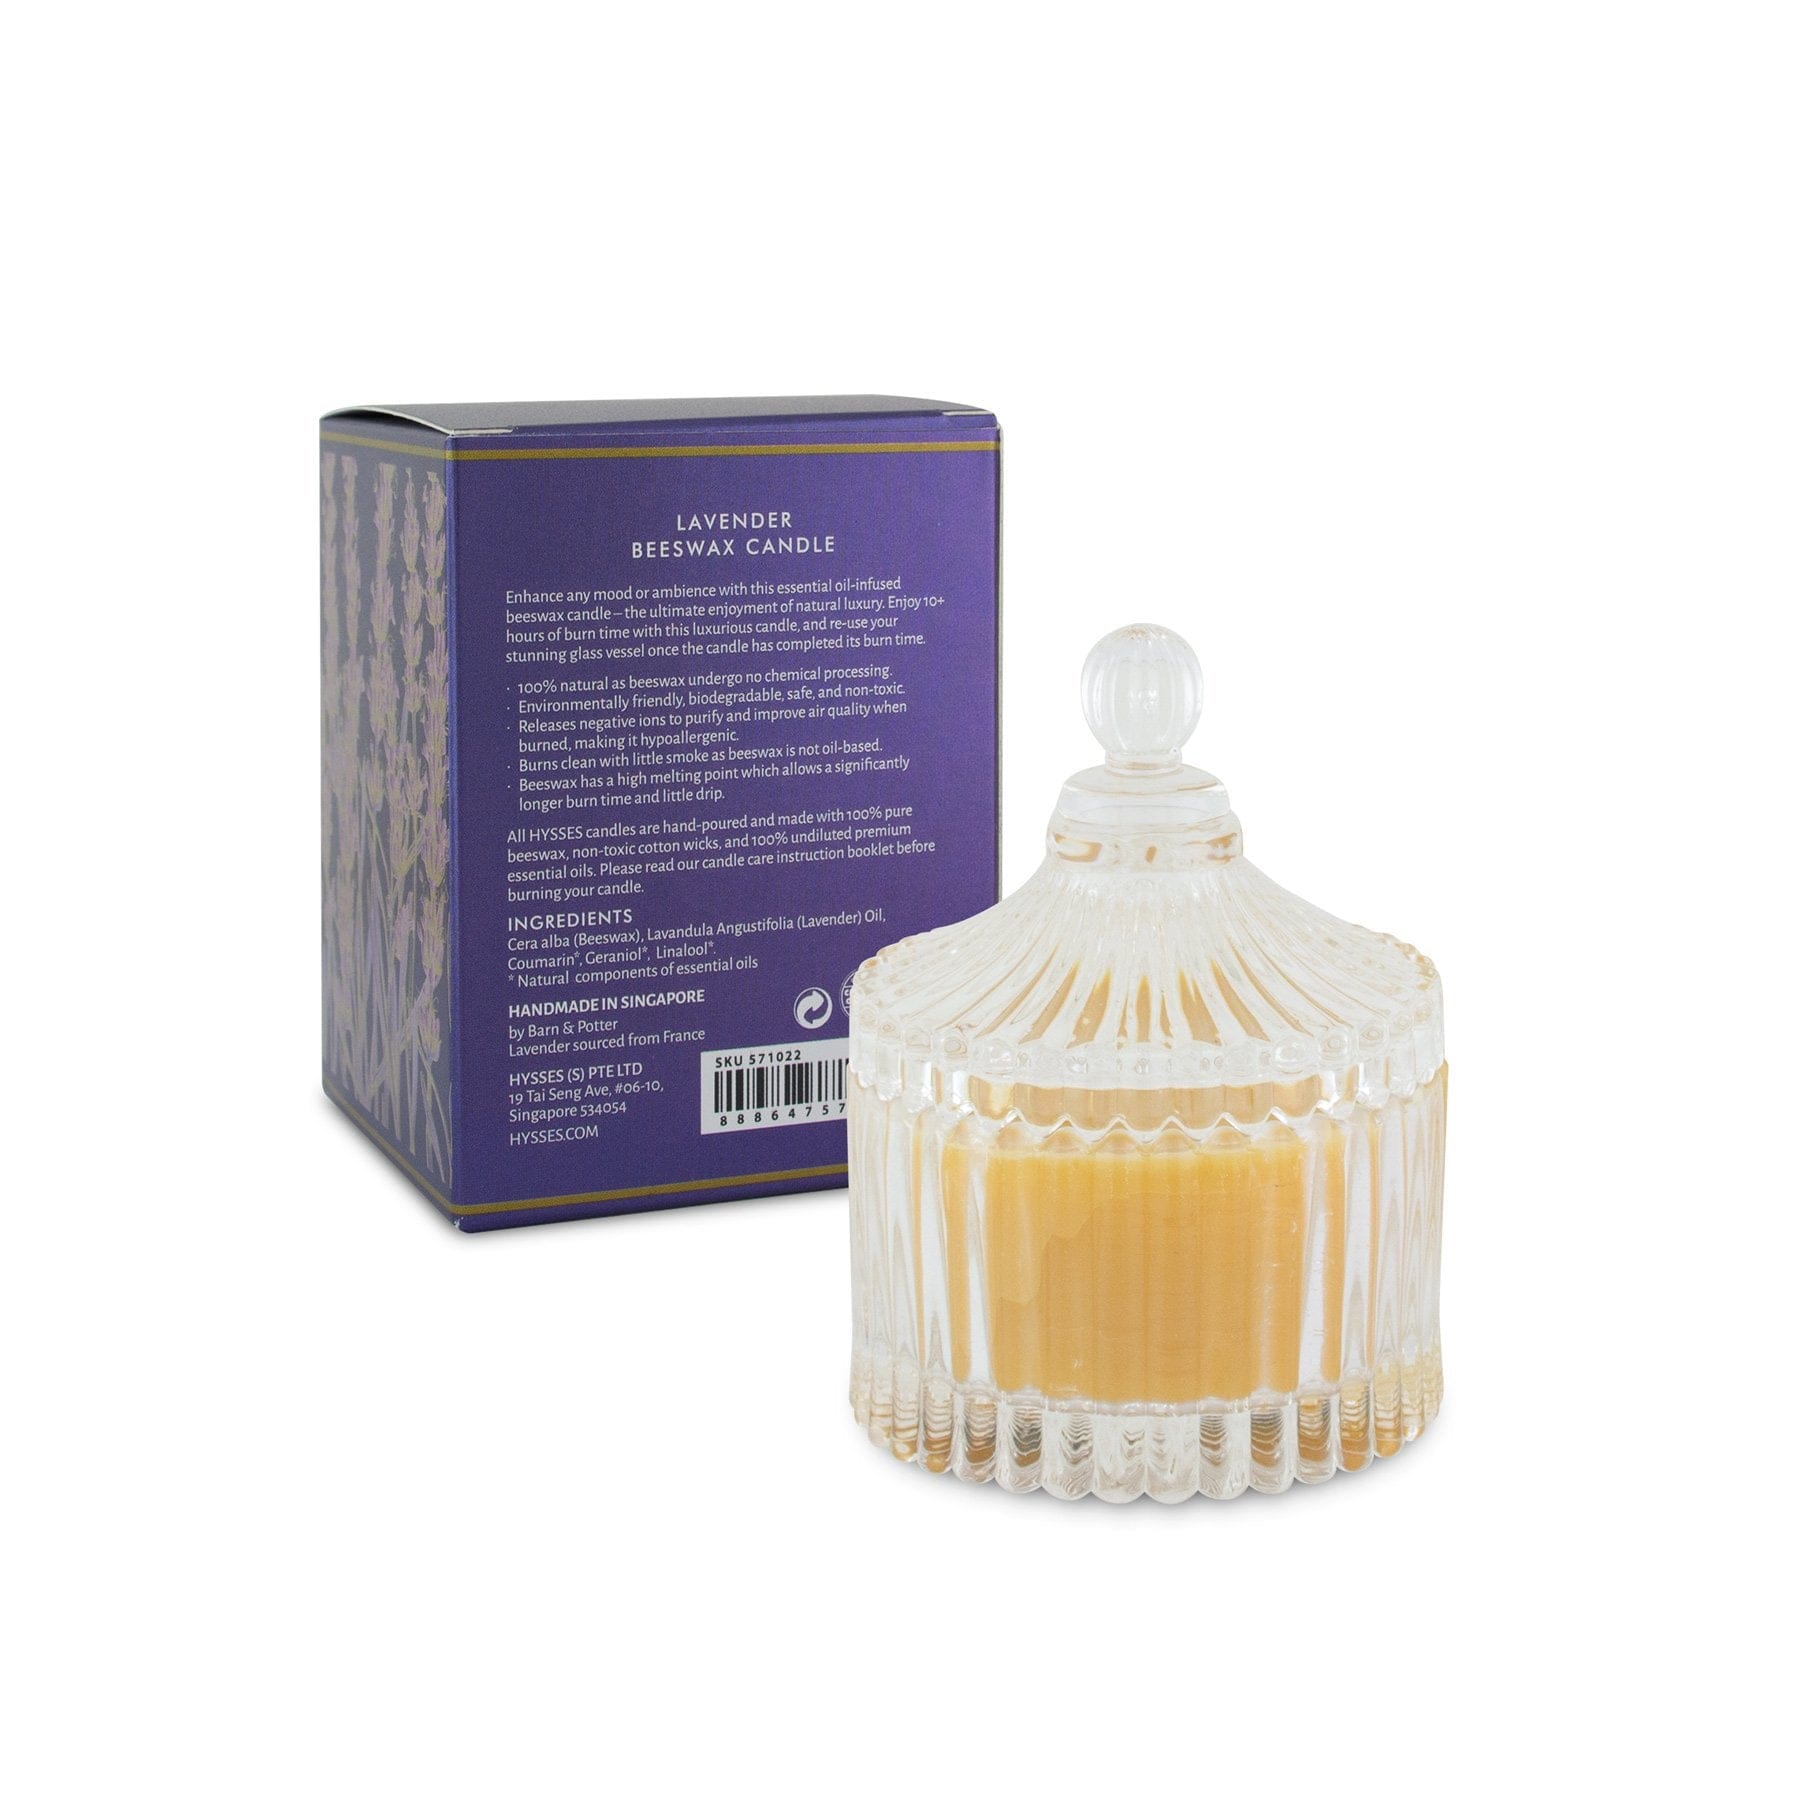 Hysses Home Scents 650g Beeswax Candle Lavender 650g